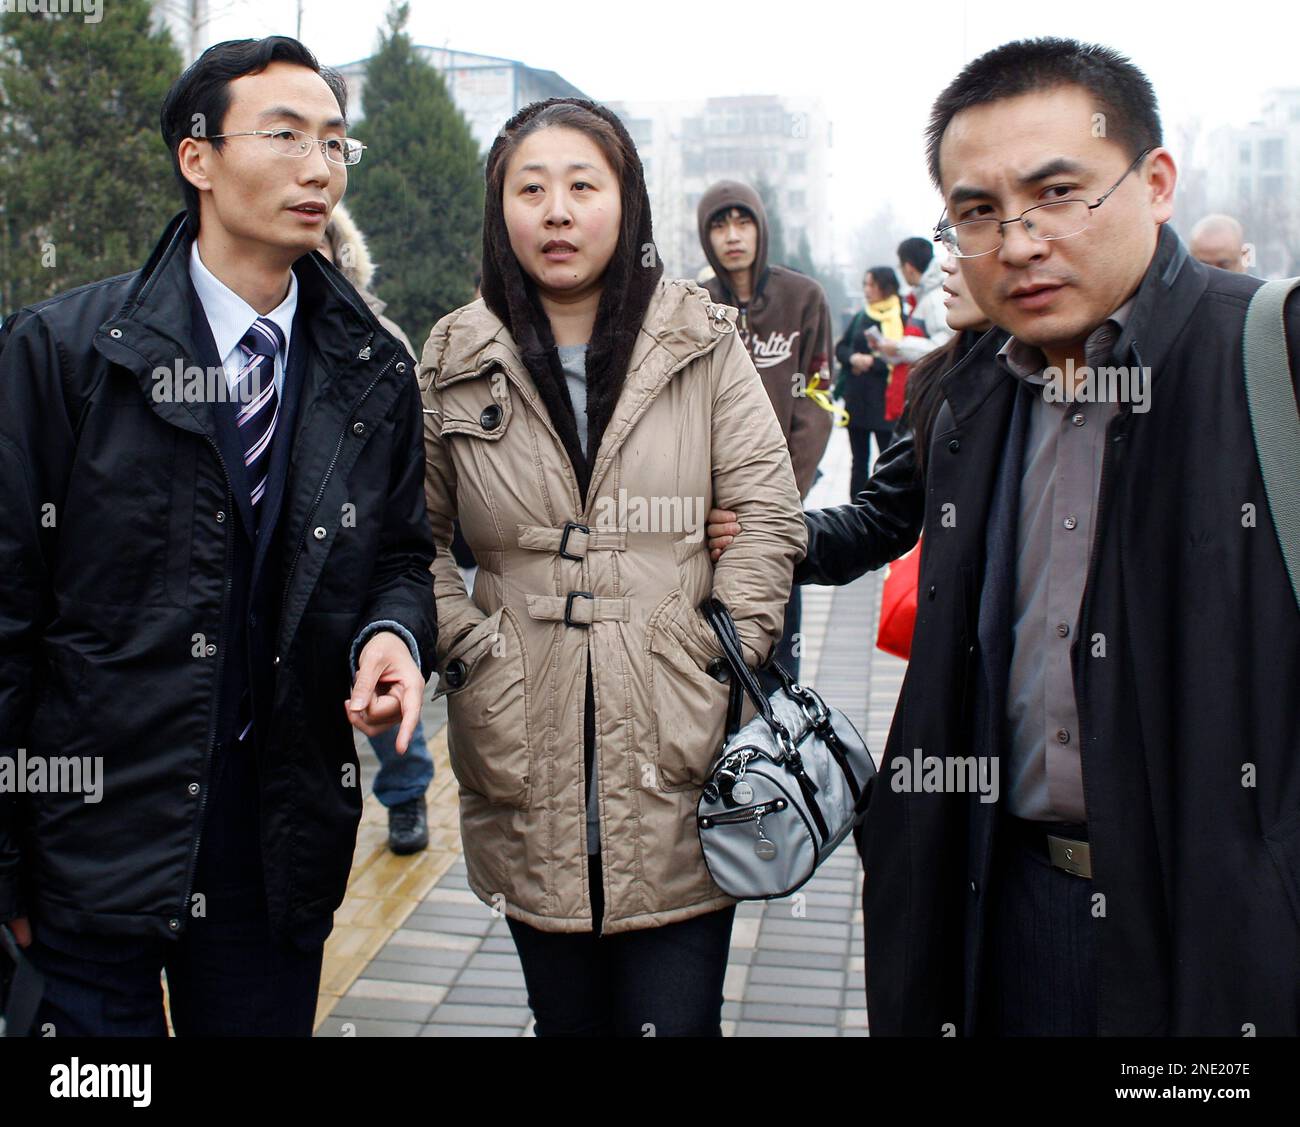 Li Xuemei, center wife of Zhao Lianhai, leaves the court house with her lawyers Li Fangping, left, and Peng Jian after her husband trial case in Beijing, Tuesday, March 30, 2010. Zhao Lianhai, who organized a support group for parents of children sickened in one of China's worst food safety scandals pleaded not guilty Tuesday to charges of inciting social disorder, his lawyer said. (AP Photo/Andy Wong) Stock Photo